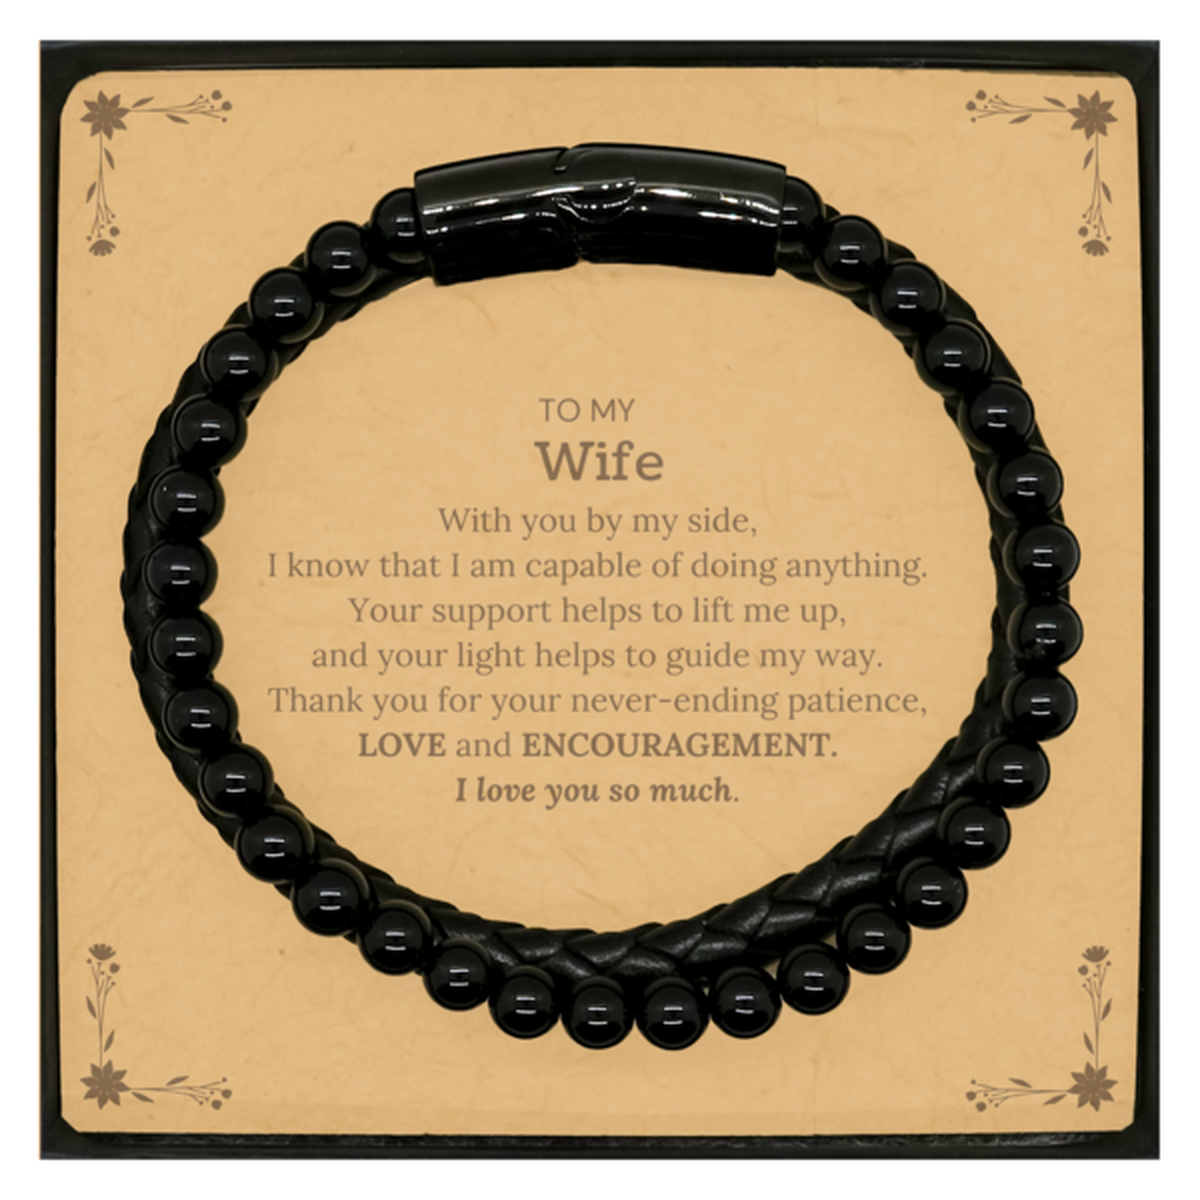 Appreciation Wife Stone Leather Bracelets Gifts, To My Wife Birthday Christmas Wedding Keepsake Gifts for Wife With you by my side, I know that I am capable of doing anything. I love you so much